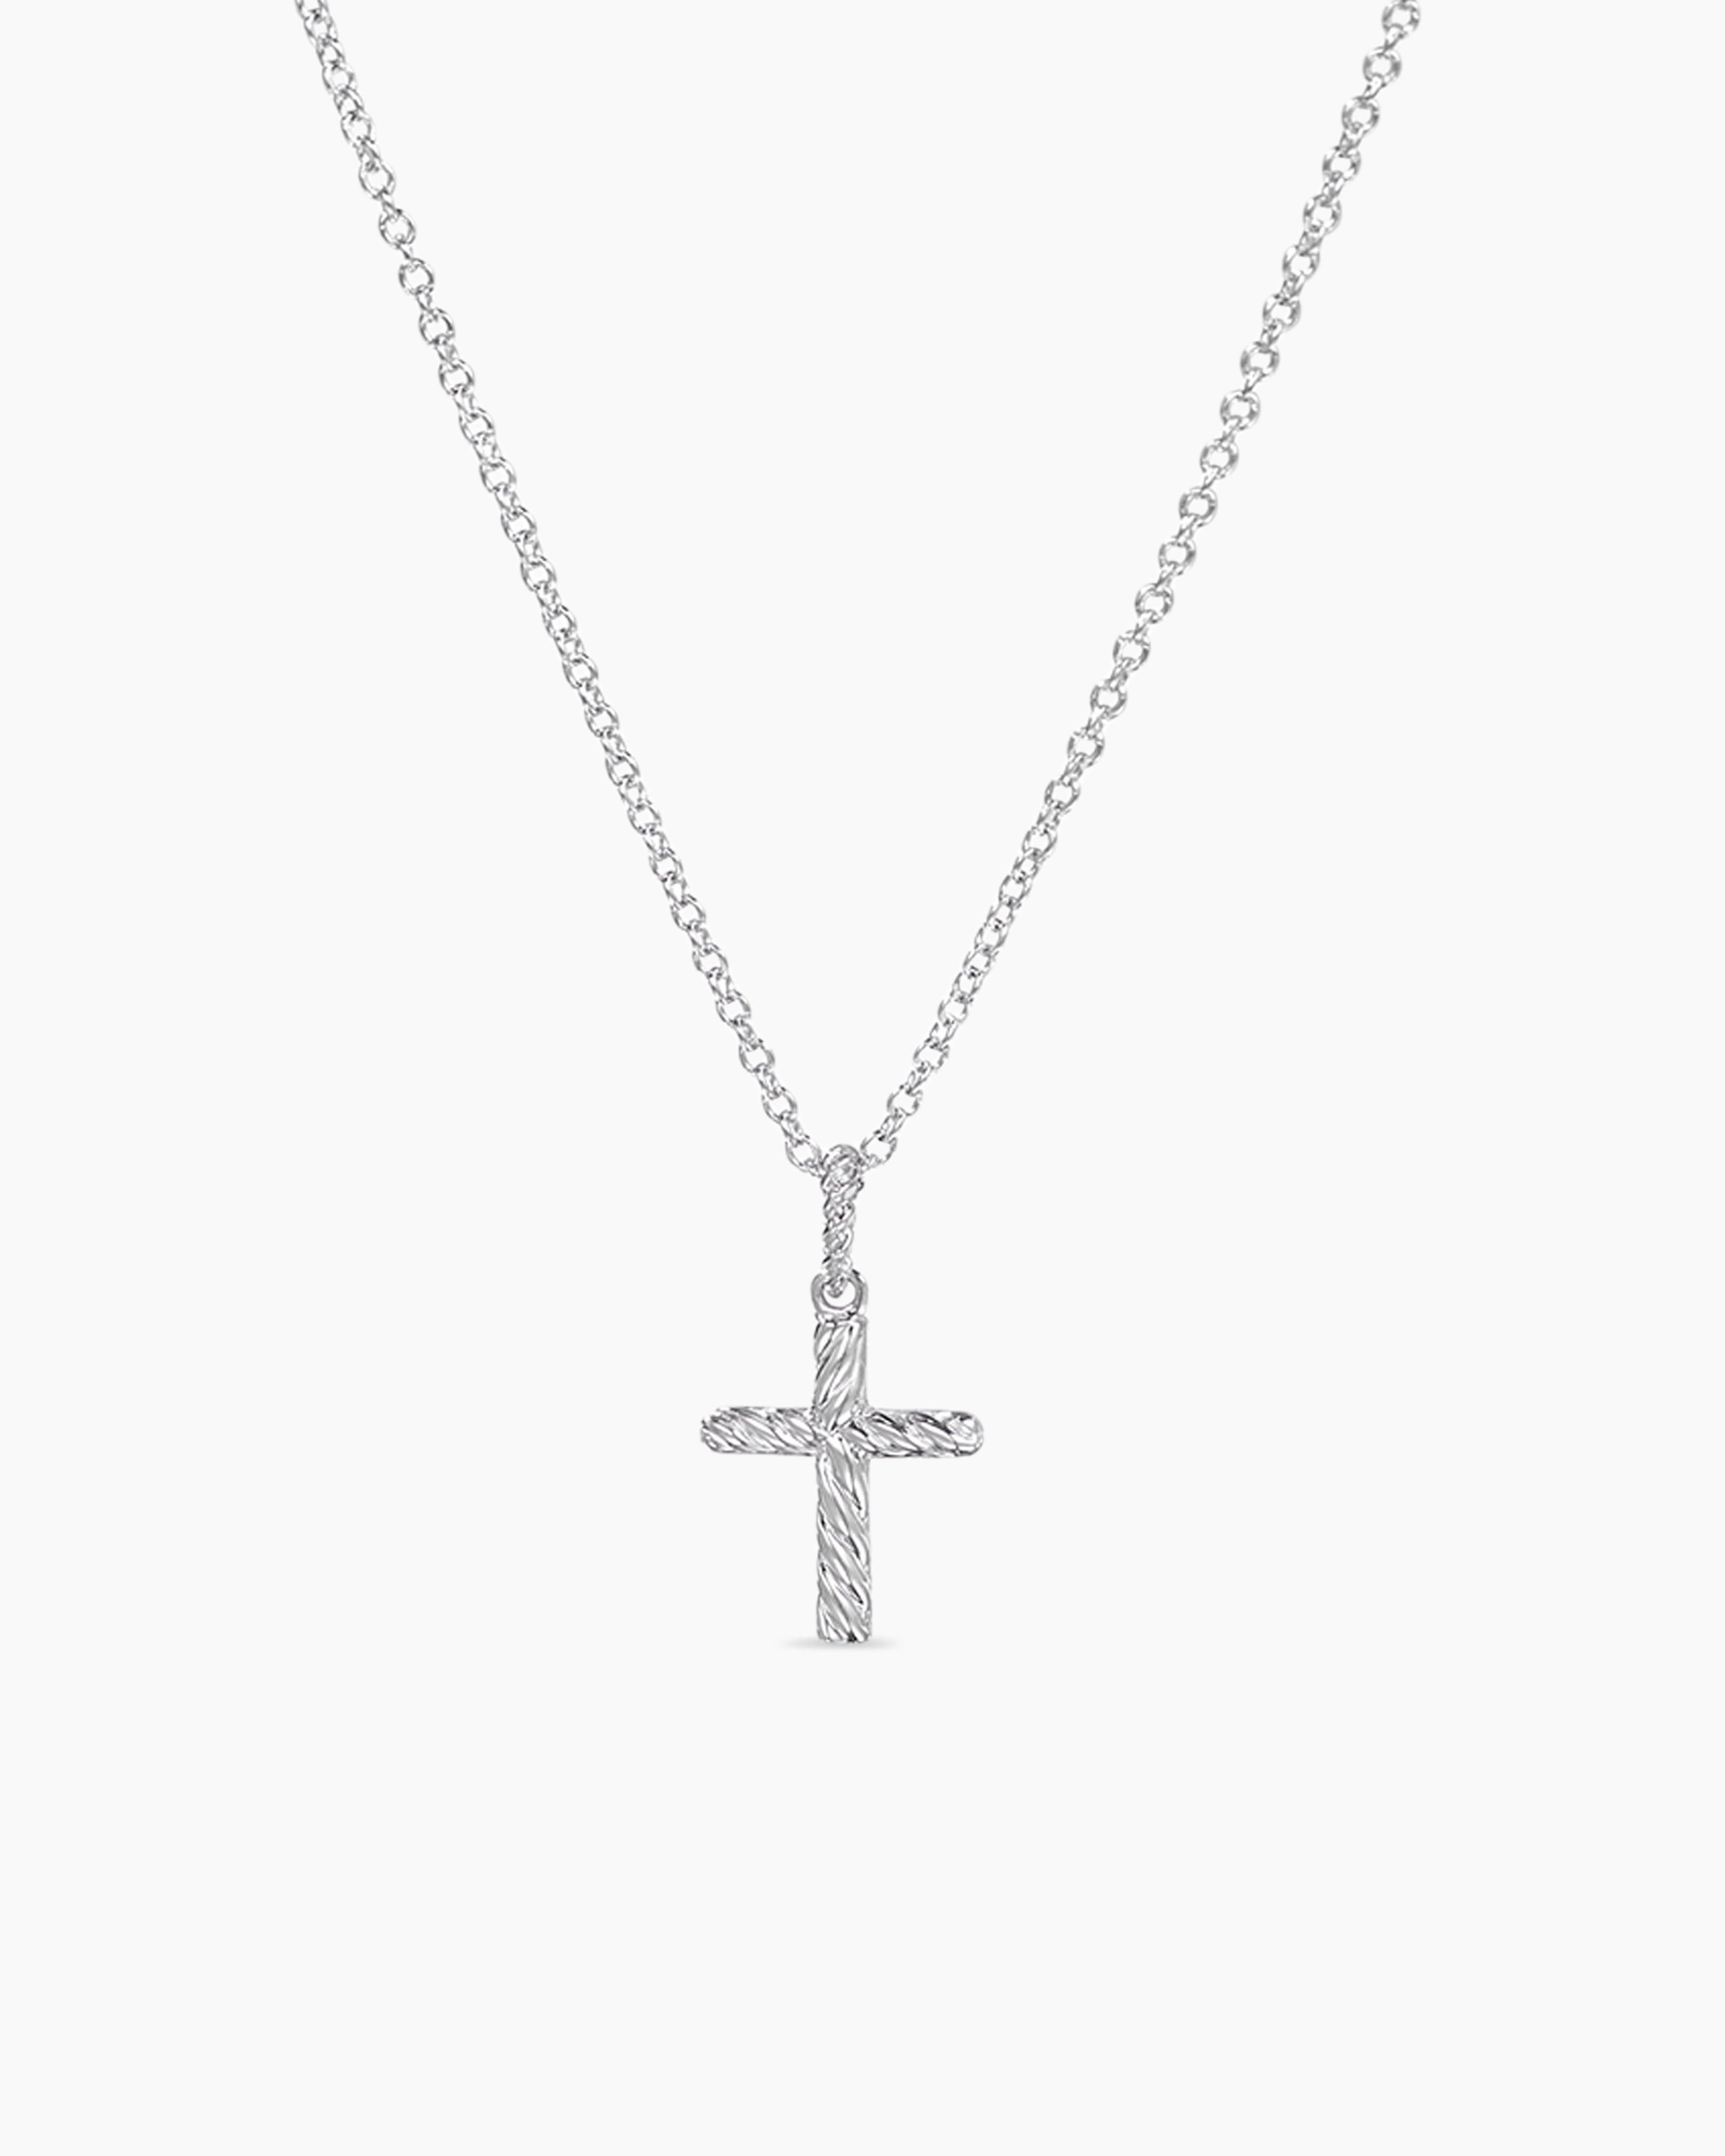 Small Flat Gold Christian Cross Pendant Necklace for Men | Classy Men  Collection